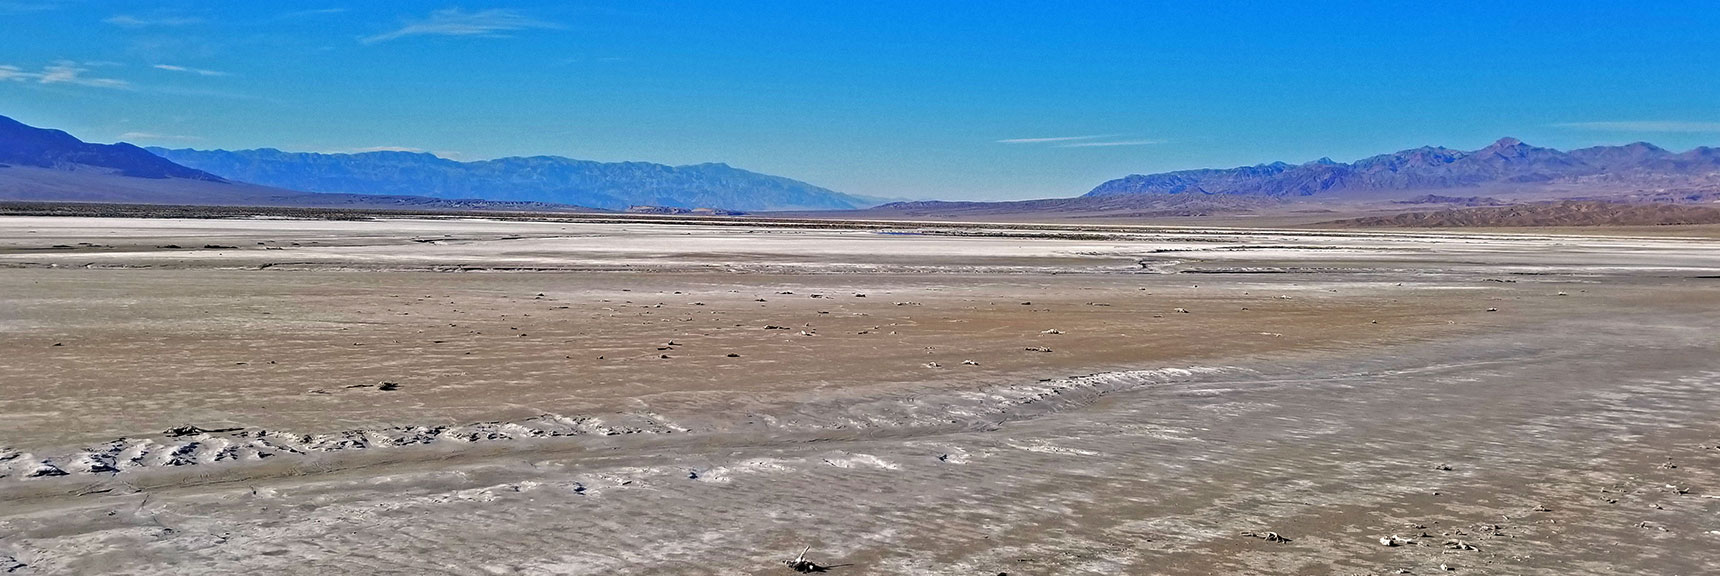 View North Across Salt Flats. Scattered Brush Gradually Dissolving into the Soil. | Return of Lake Manly (Lake in Death Valley) | Death Valley National Park, California